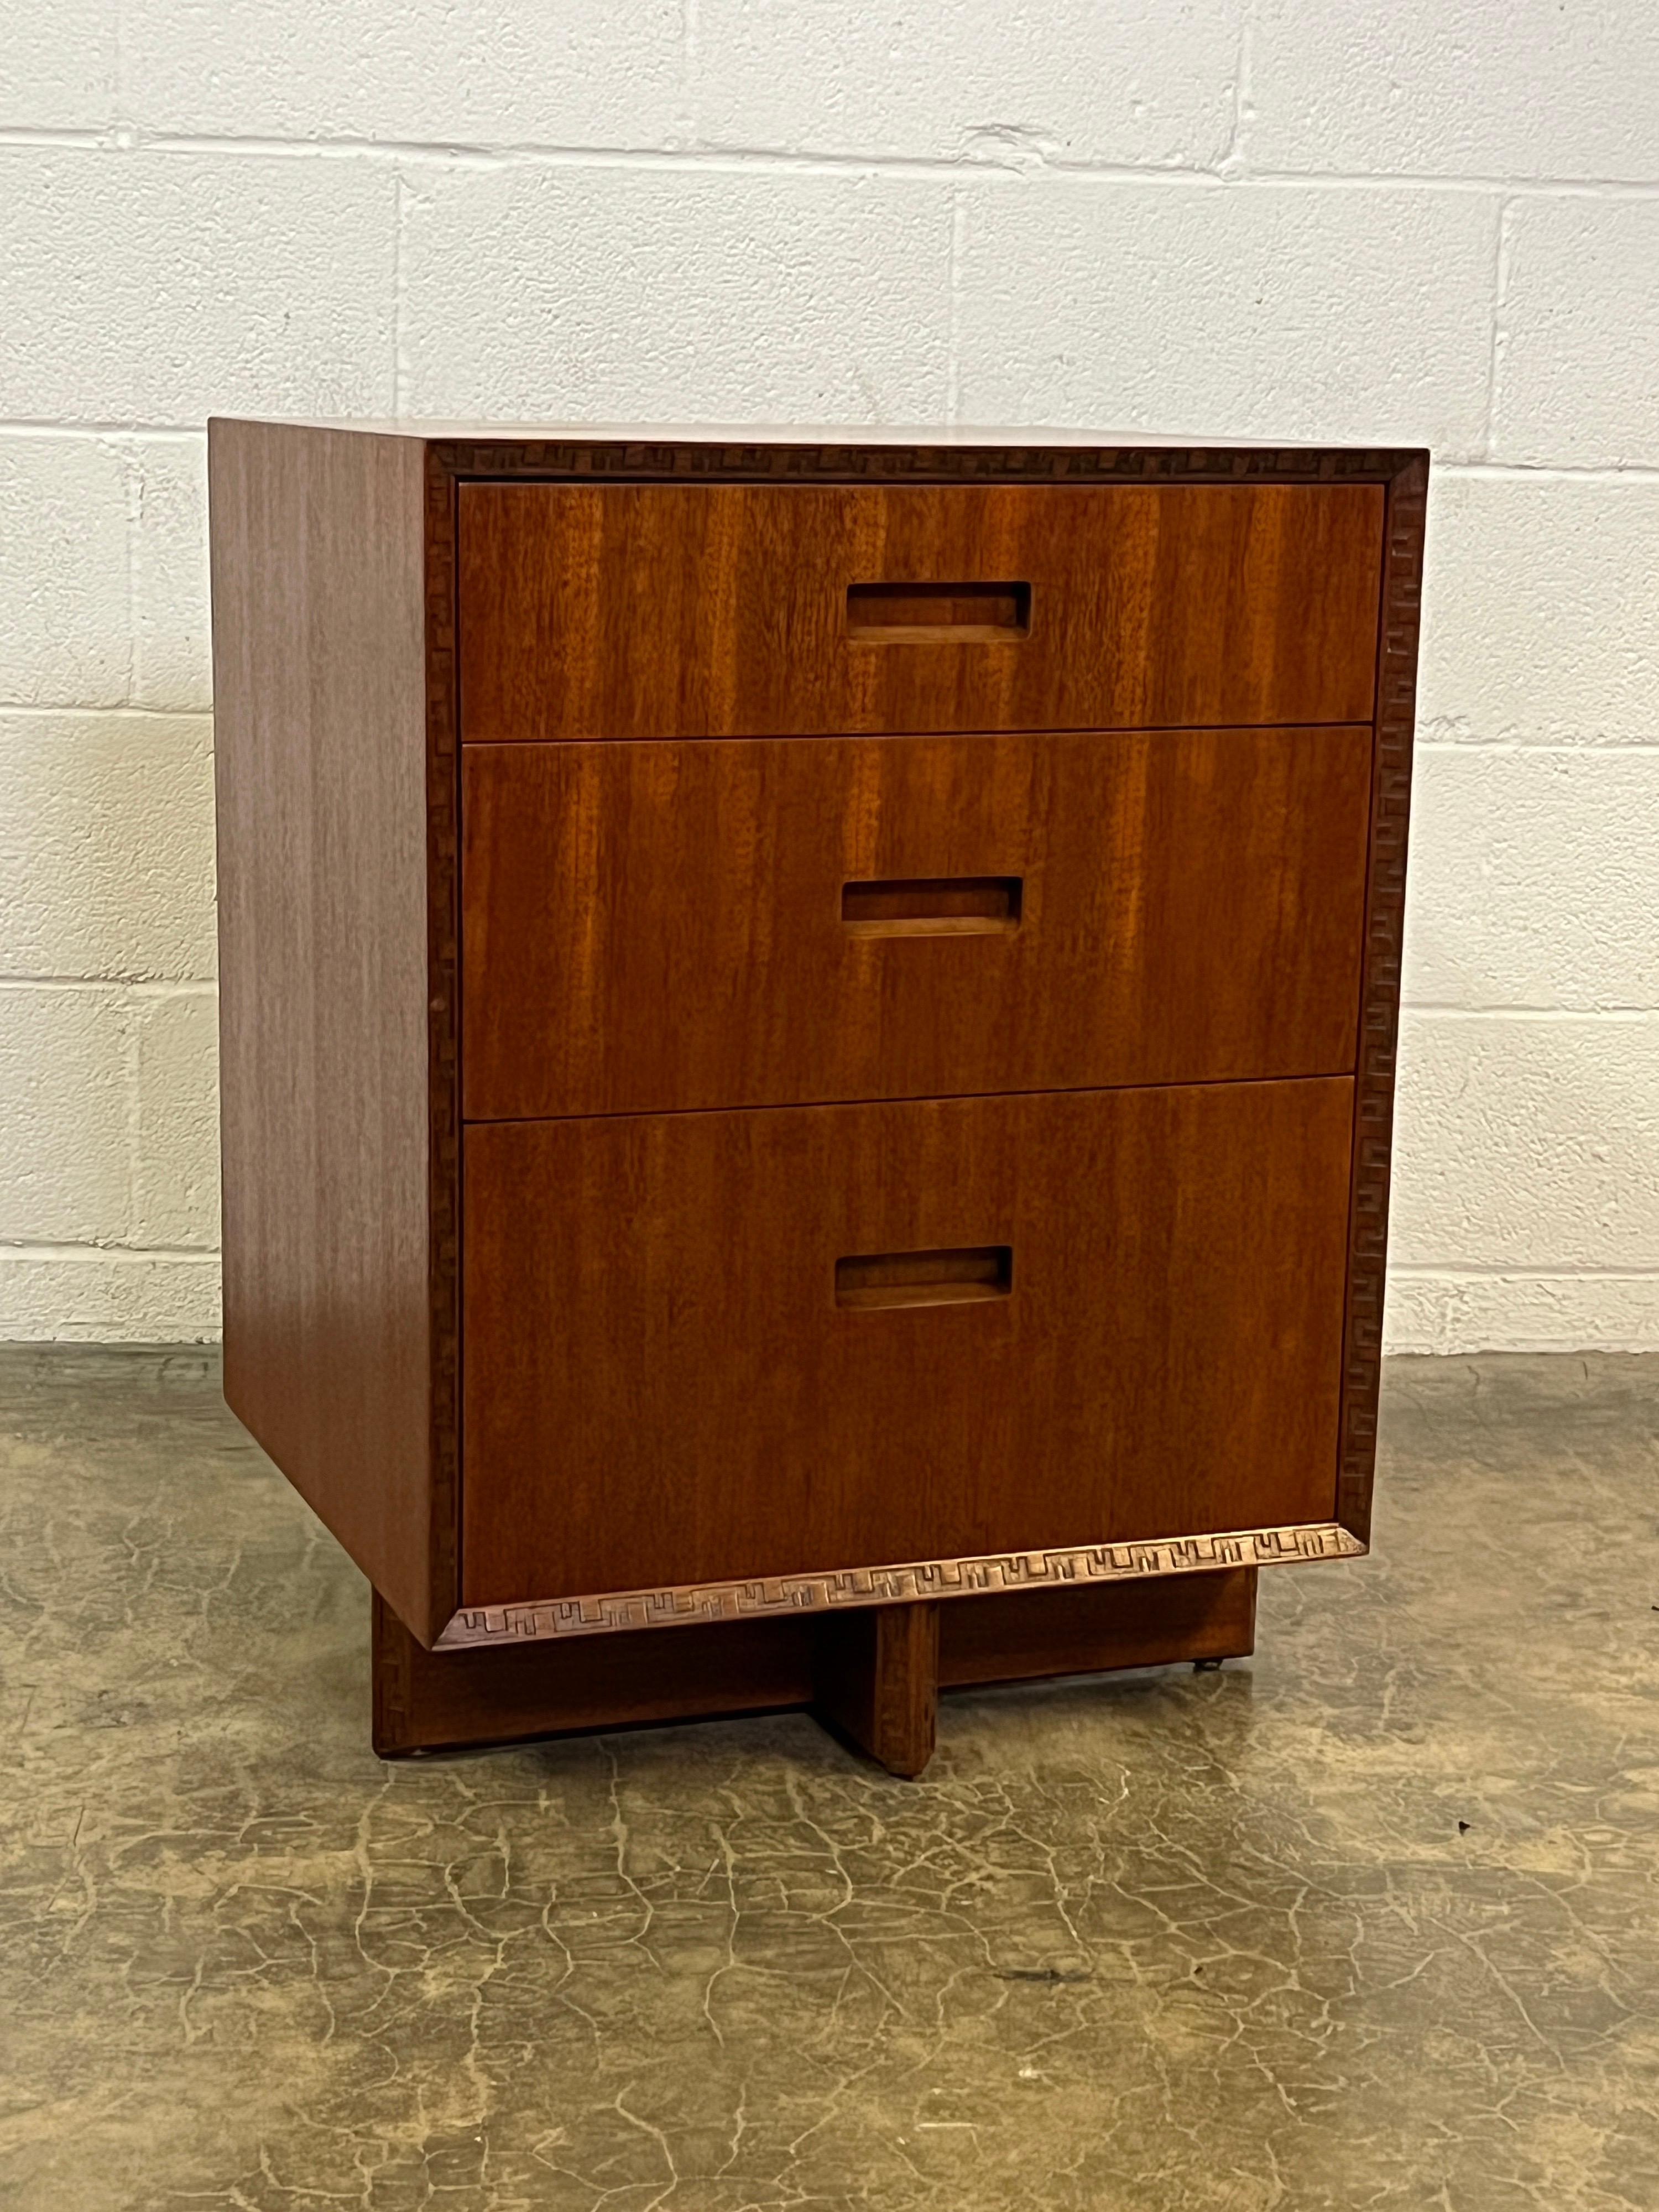 A mahogany three drawer chest or nightstand designed by Frank Lloyd Wright for Henredon.